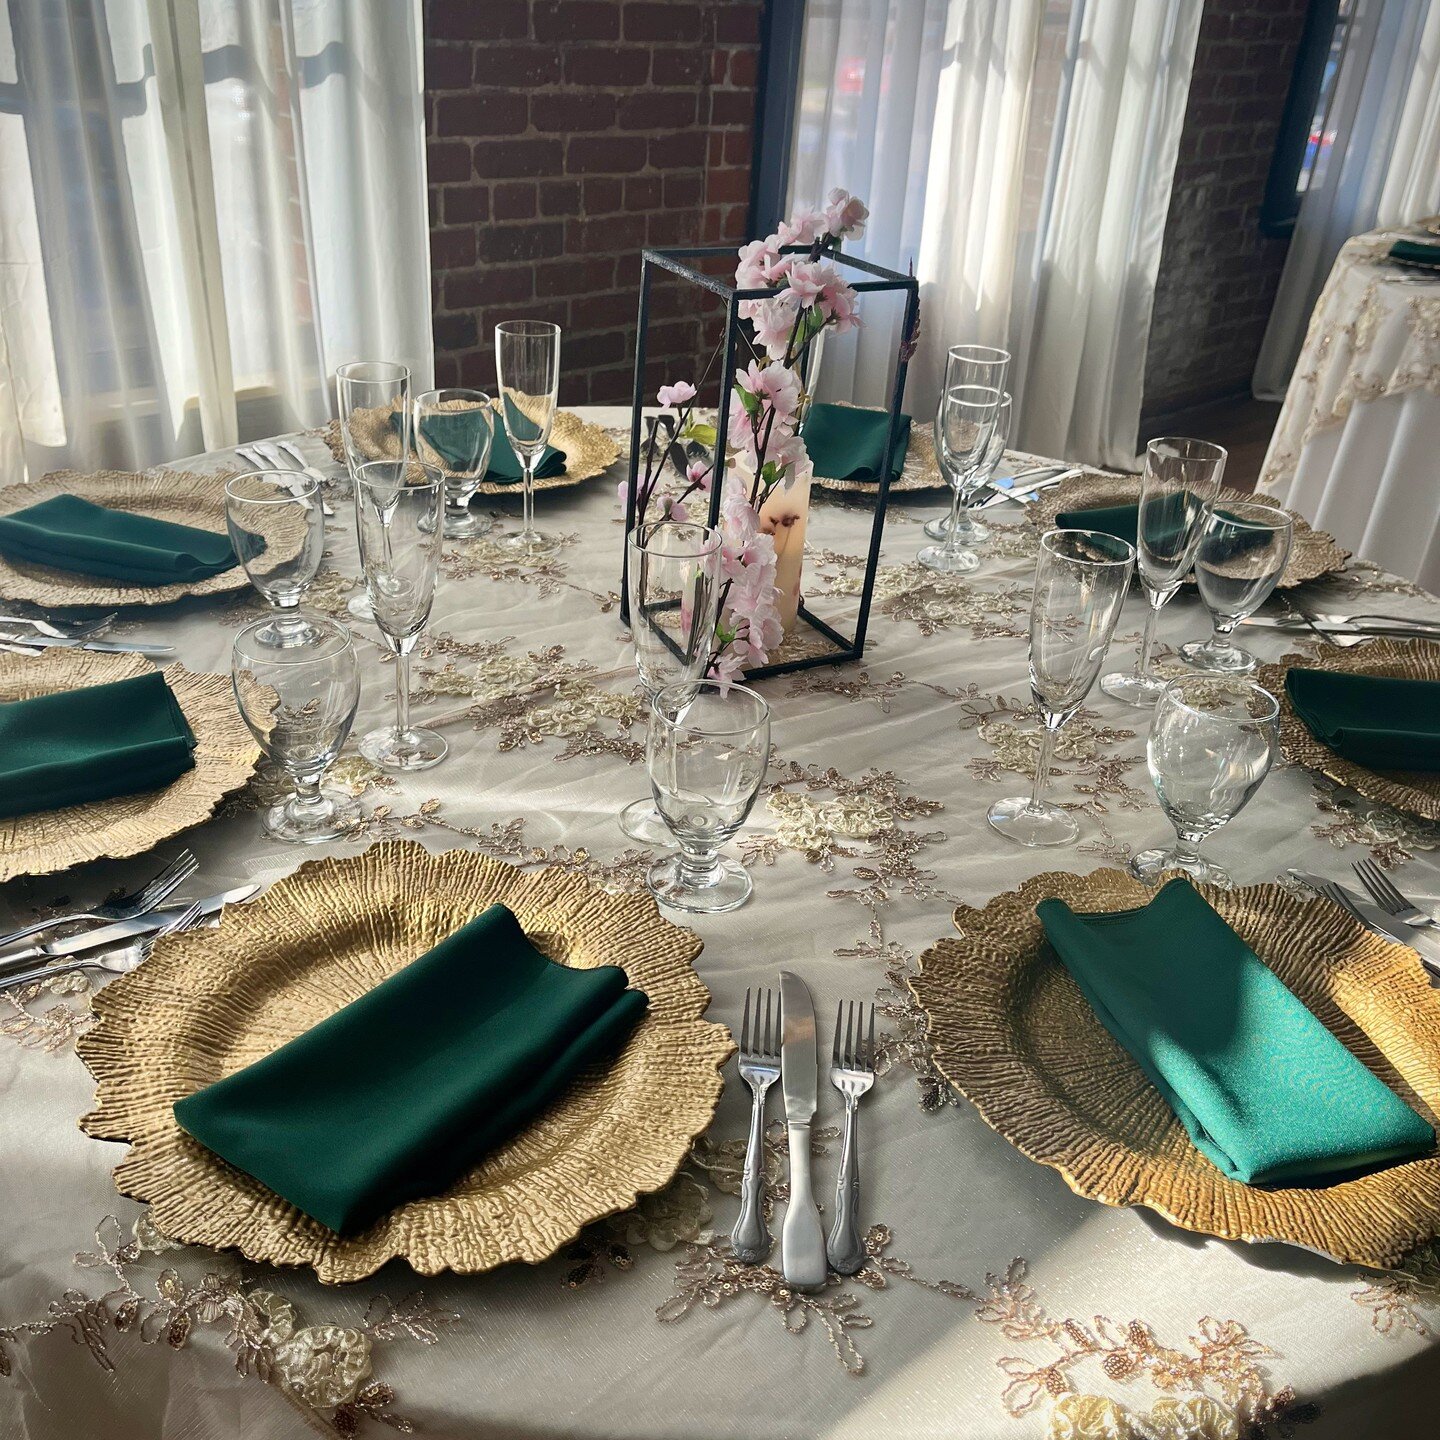 Life Art Center Event Venue offers two beautiful banquet halls, perfect for any event! Book your next party with us today. Call (951) 784-5849 for tours or more info!
www.lacriverside.com | info@lacriverside.com 
#EventVenue #BanquetHalls #RiversideC